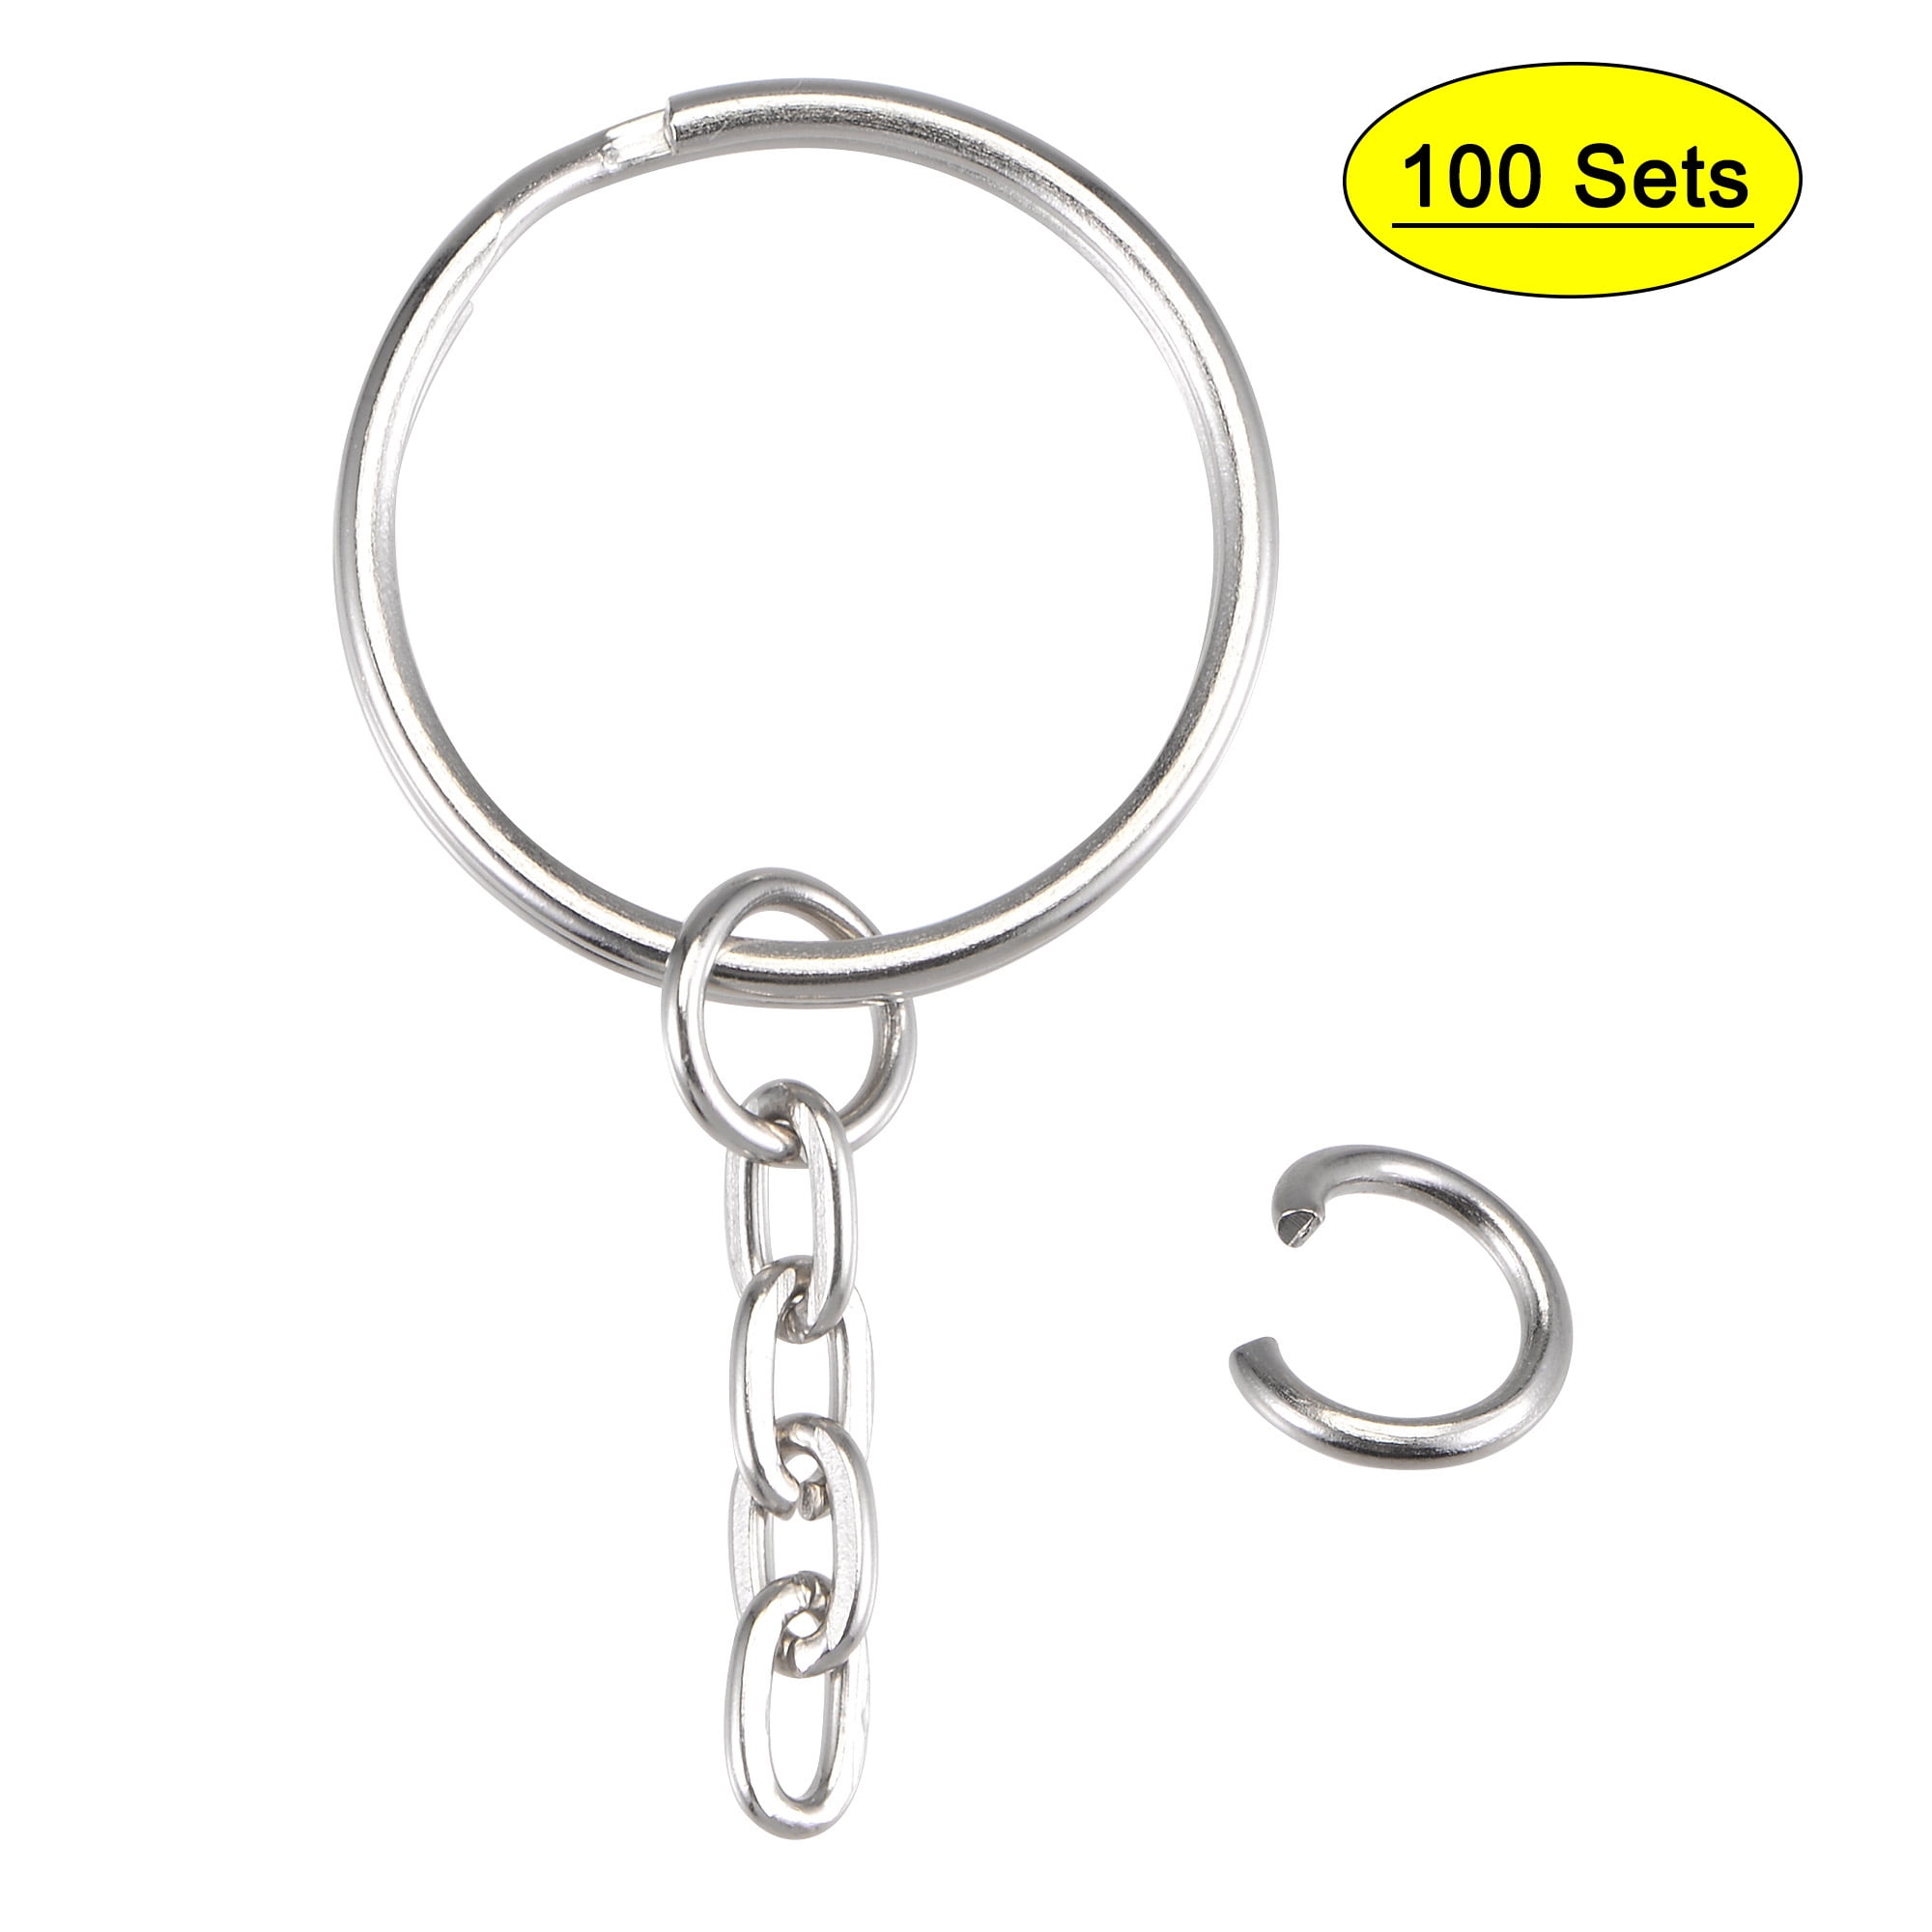 Key Chain Key Ring 28mm Double Split Ring with Chain Stainless Steel G86 